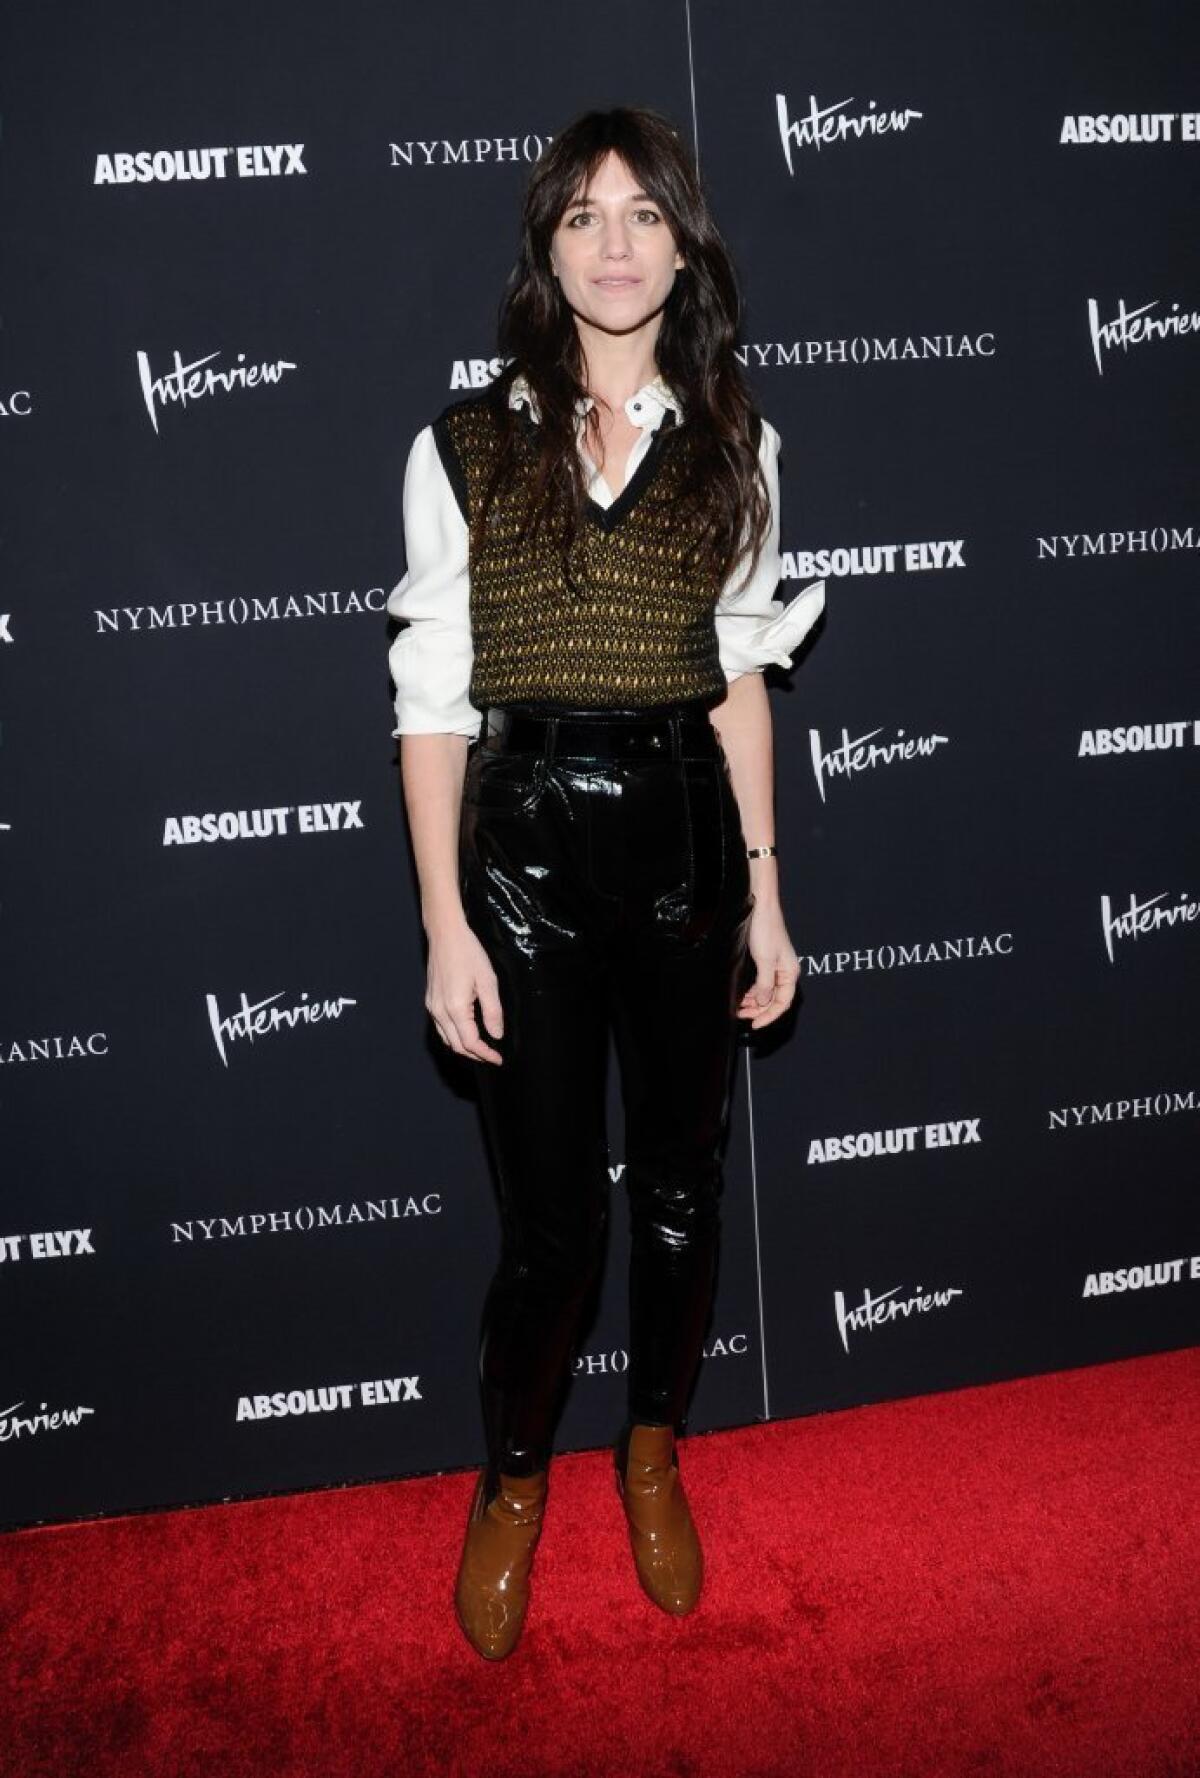 Actress Charlotte Gainsbourg attends the premiere of her movie "Nymphomaniac: Volume I" at New York's Museum of Modern Art on Thursday.